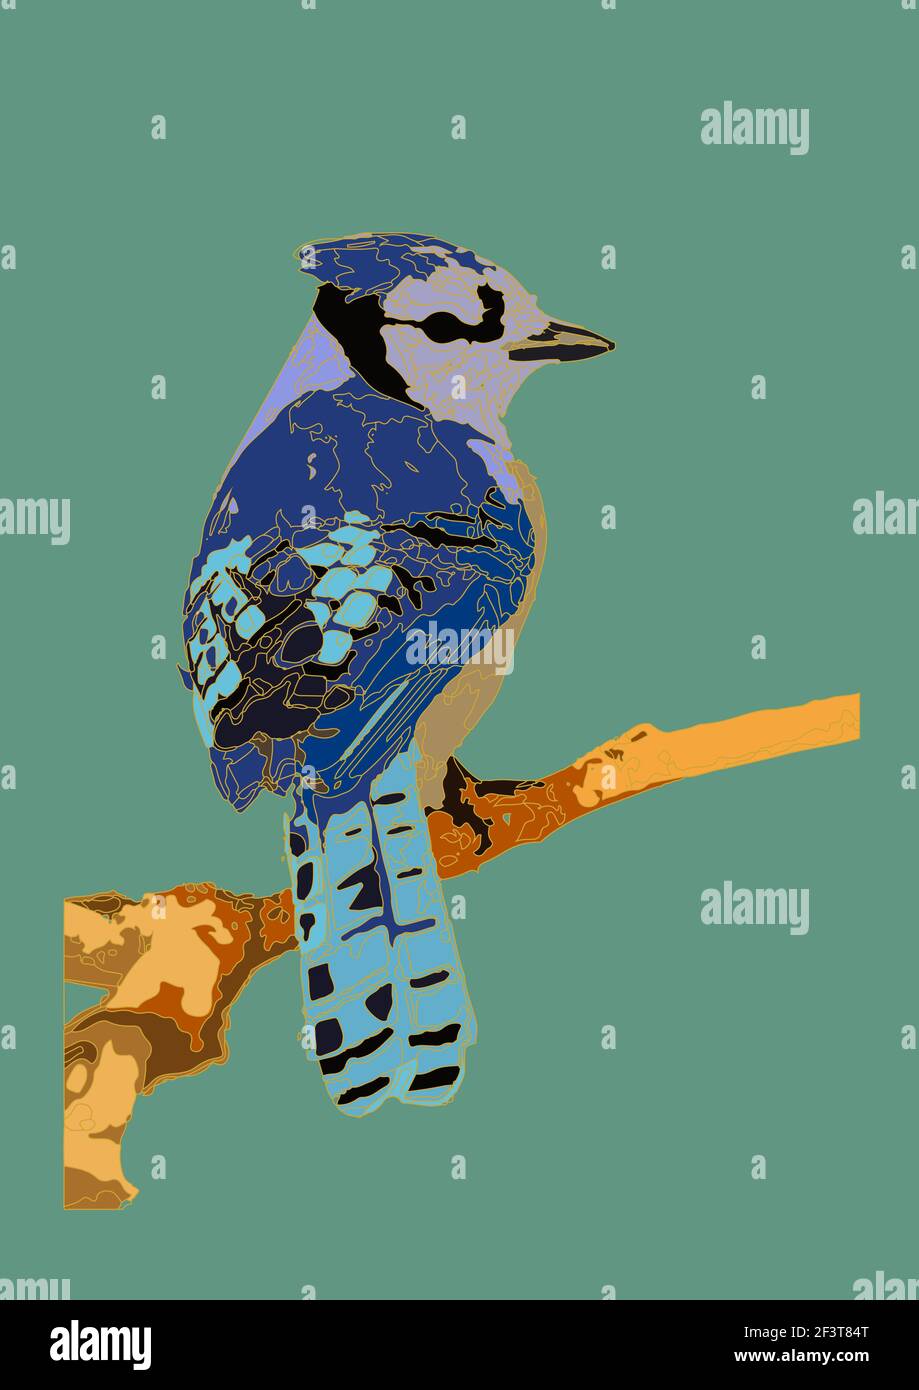 An illustration of the blue jay perched on a branch on green background Stock Photo